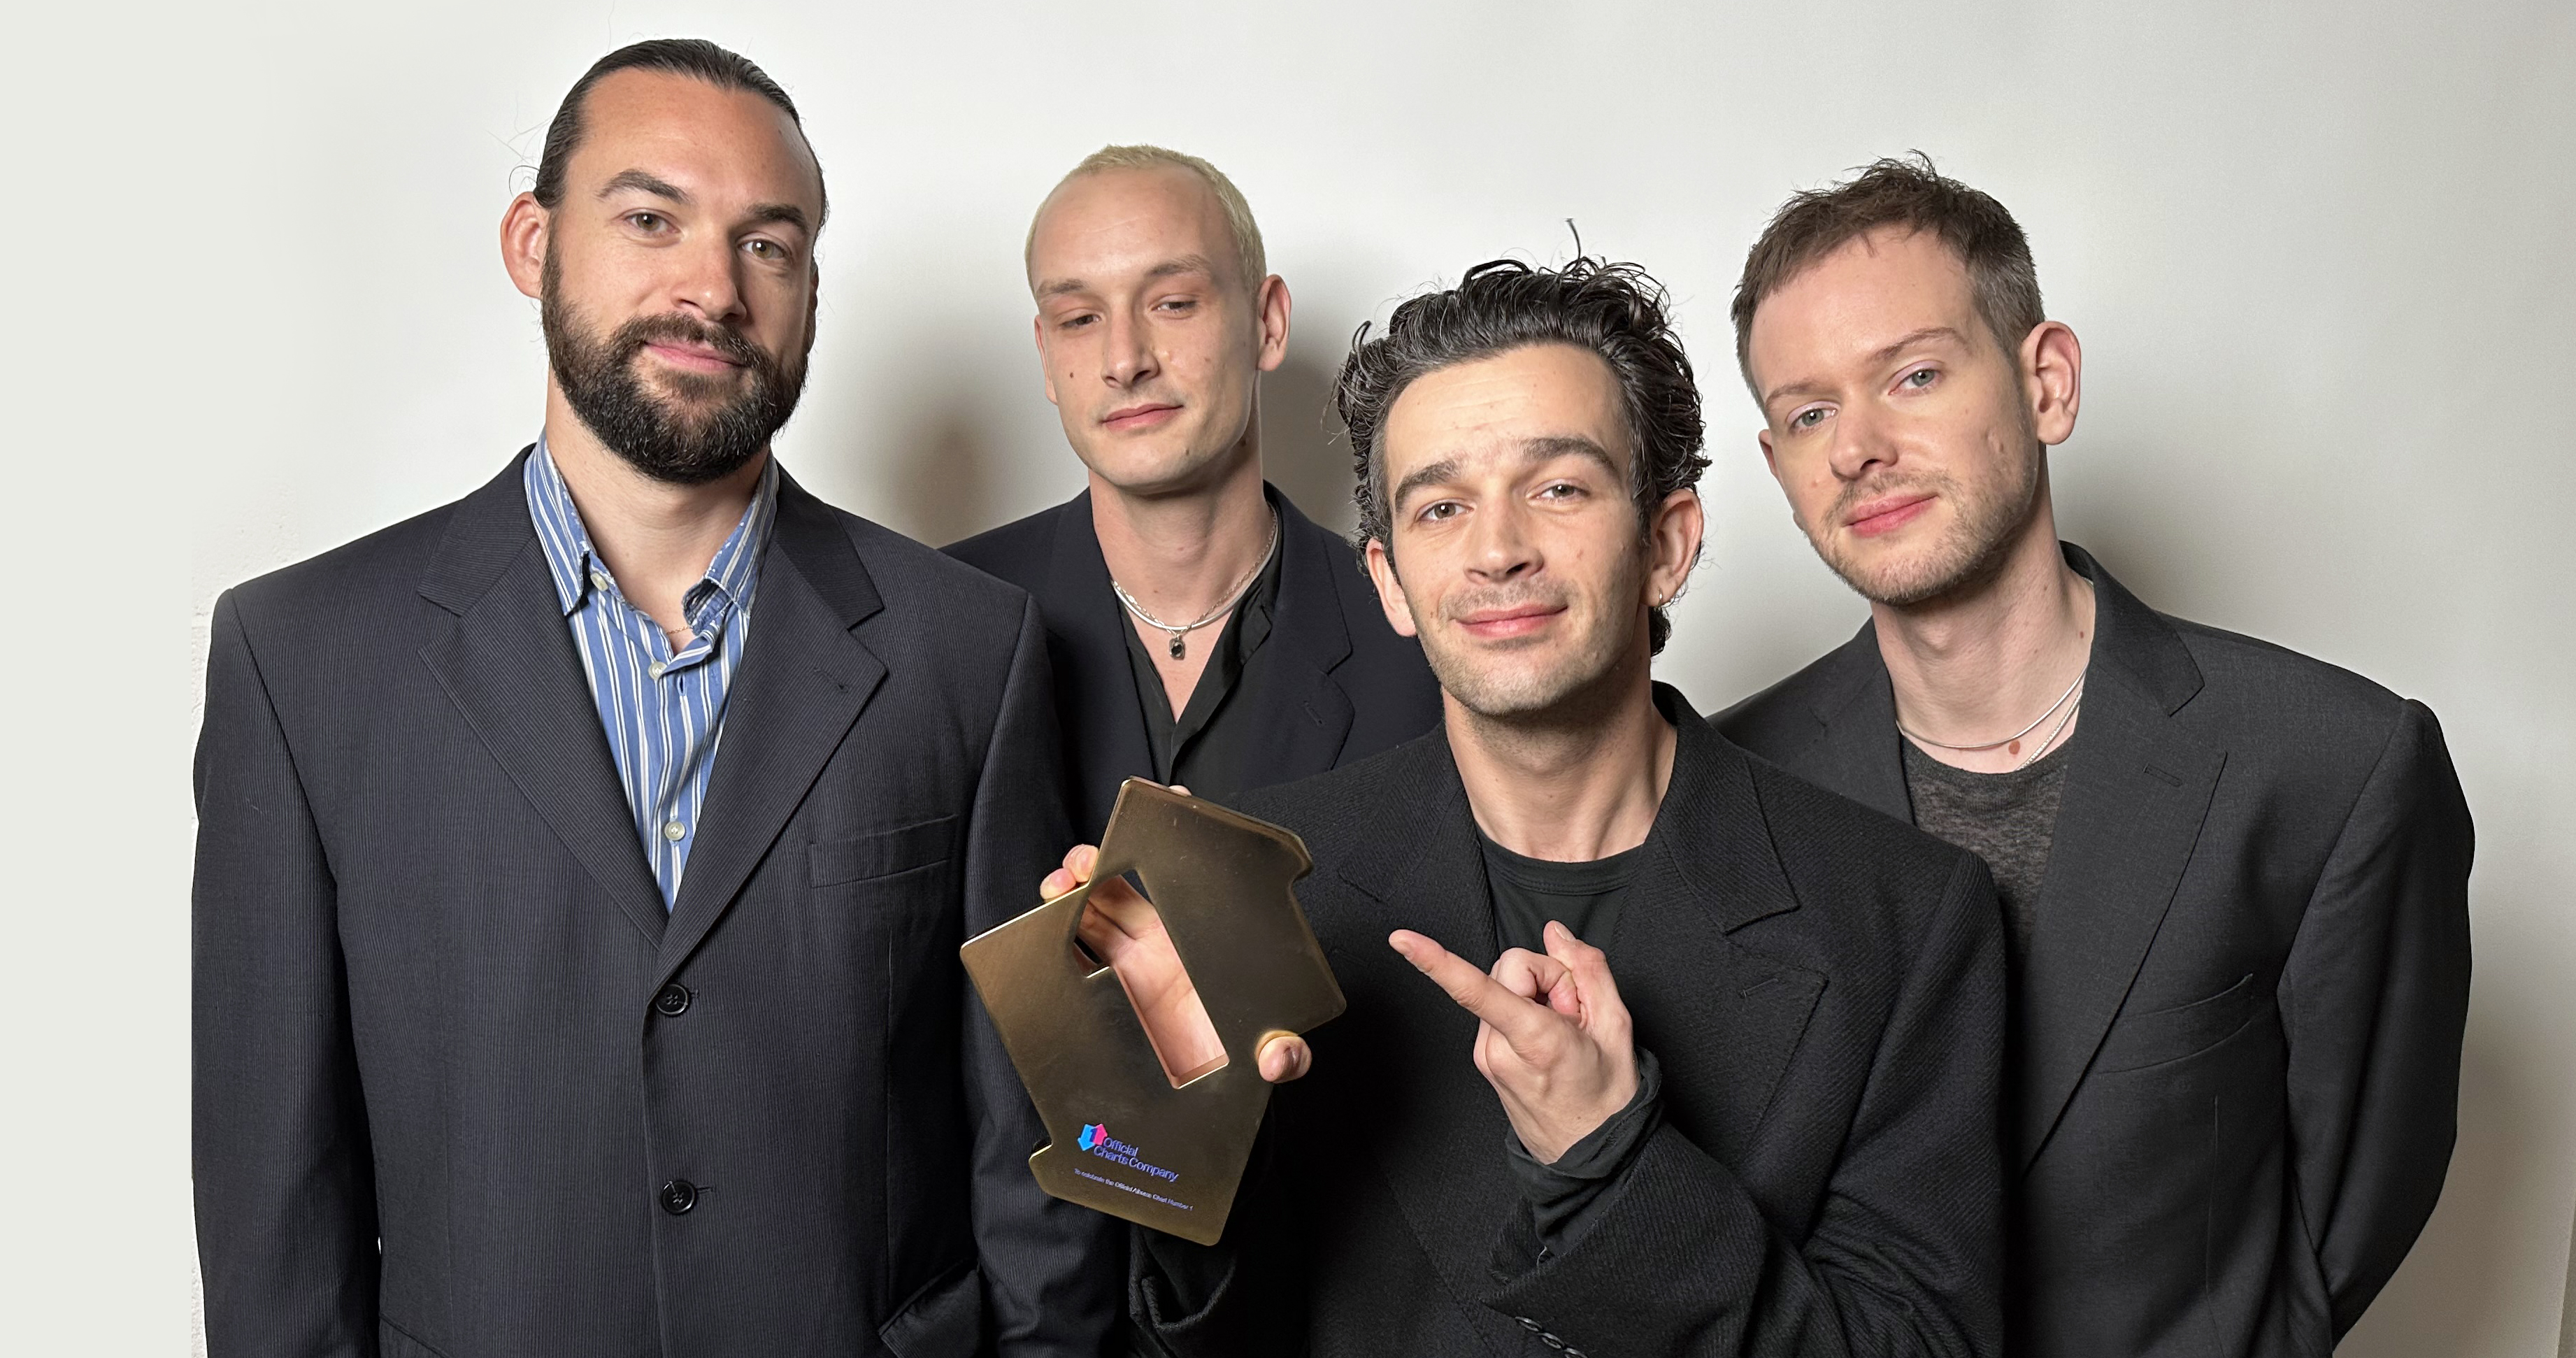 The 1975 score fifth consecutive Number 1 album with Being Funny In A Foreign Language